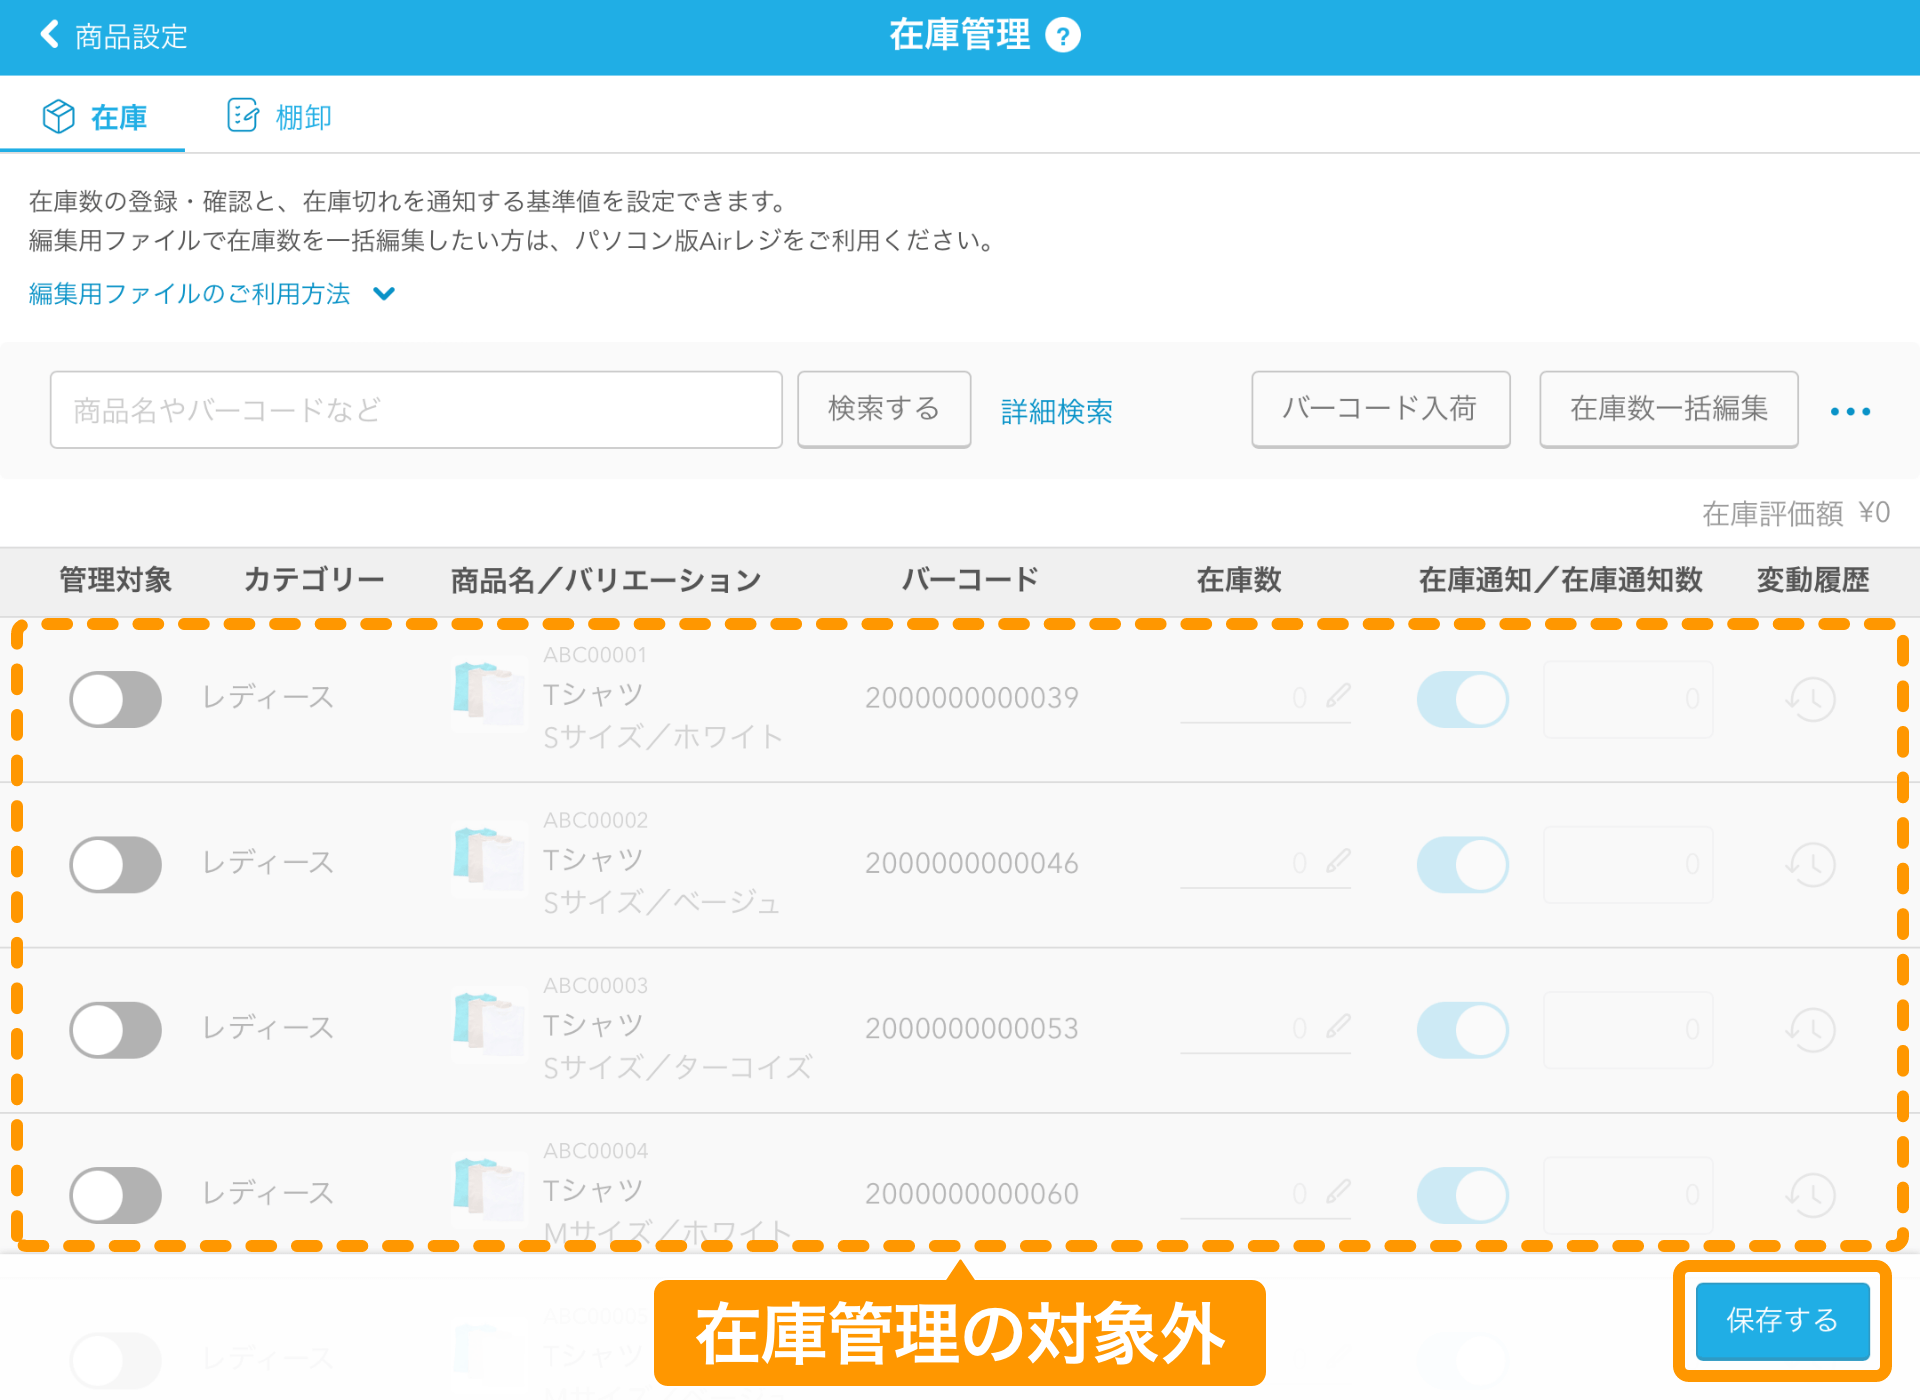 24 Airレジ 在庫管理画面 一括編集 編集する